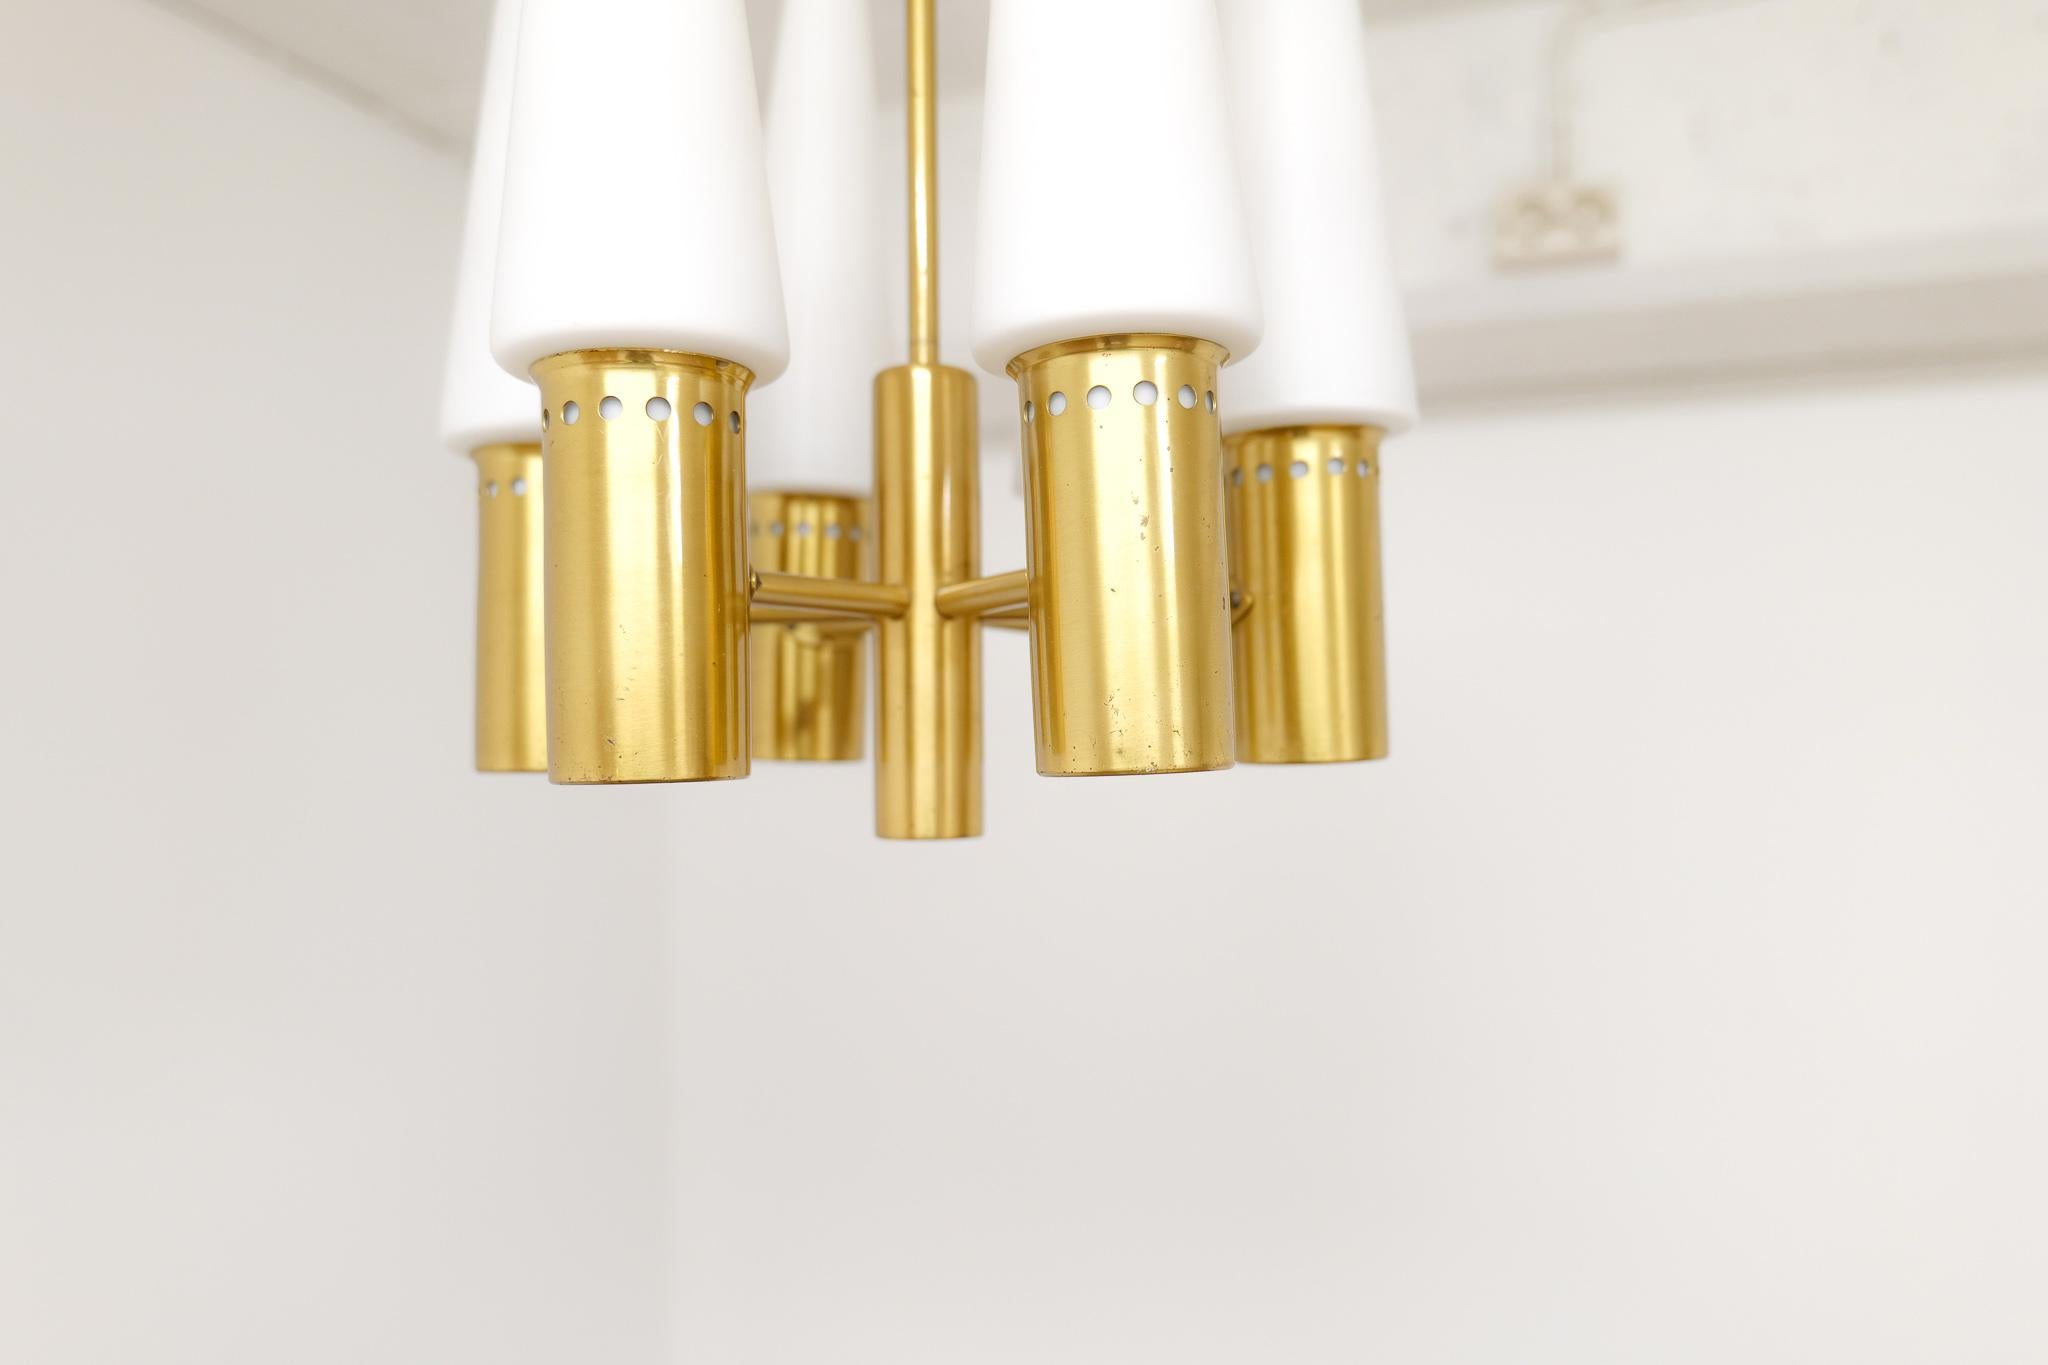 Midcentury Hans-Agne Jakobsson Brass and Opaline Ceiling Lamp, Sweden, 1950s For Sale 5